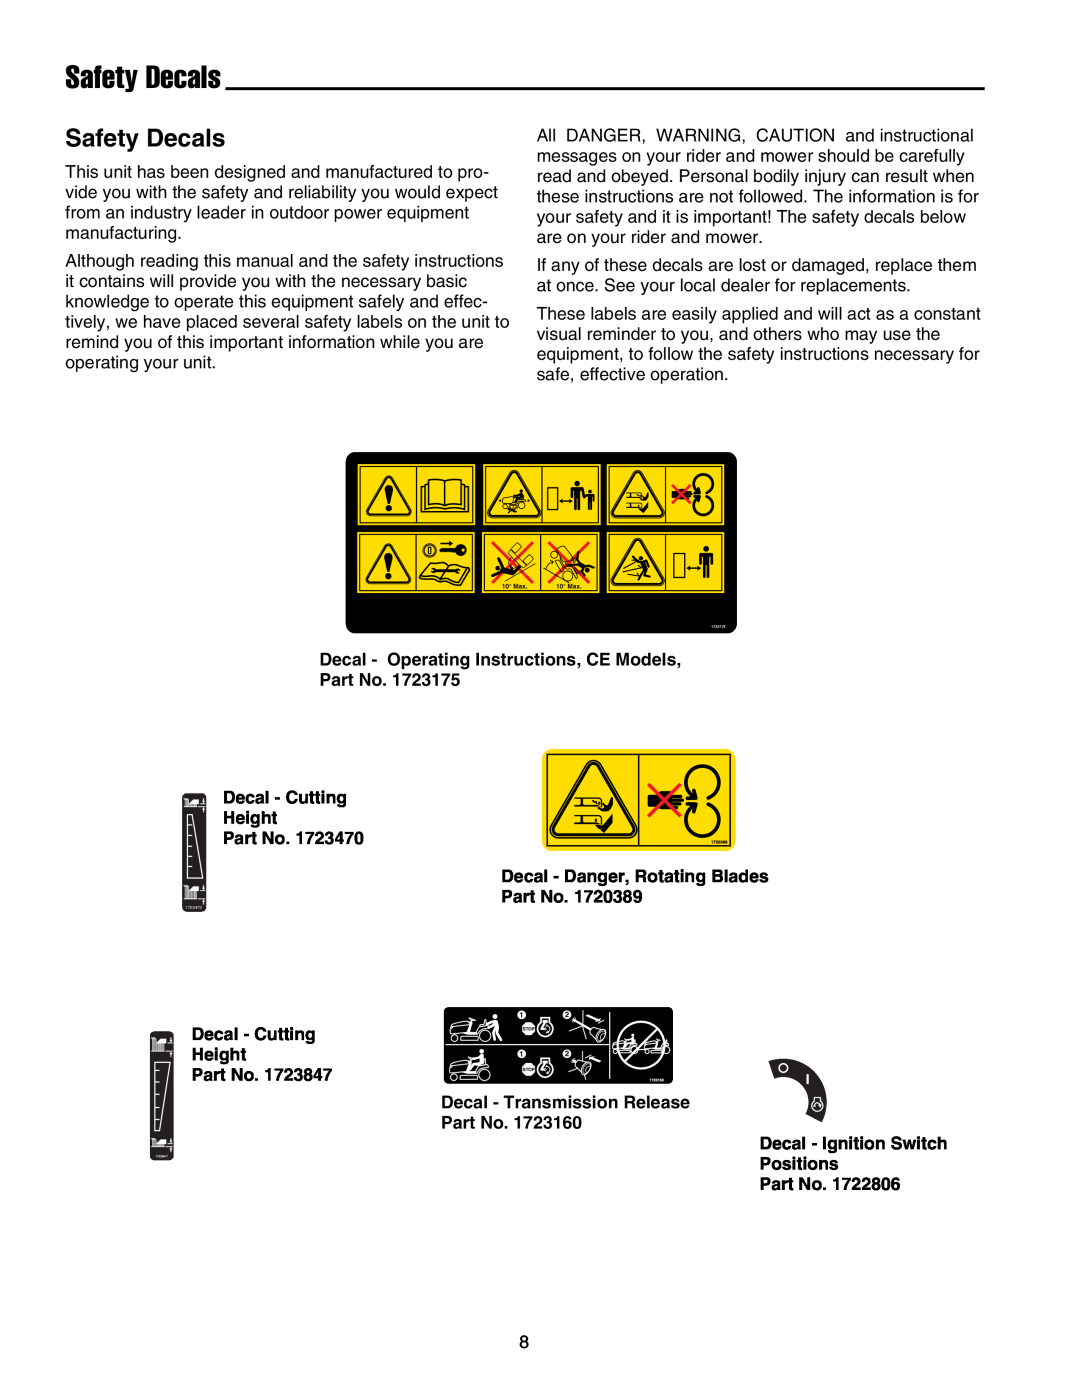 Snapper 1800, 2800, 500, 1700, 2700, 400 Safety Decals, Decal - Operating Instructions, CE Models, Decal - Cutting Height 